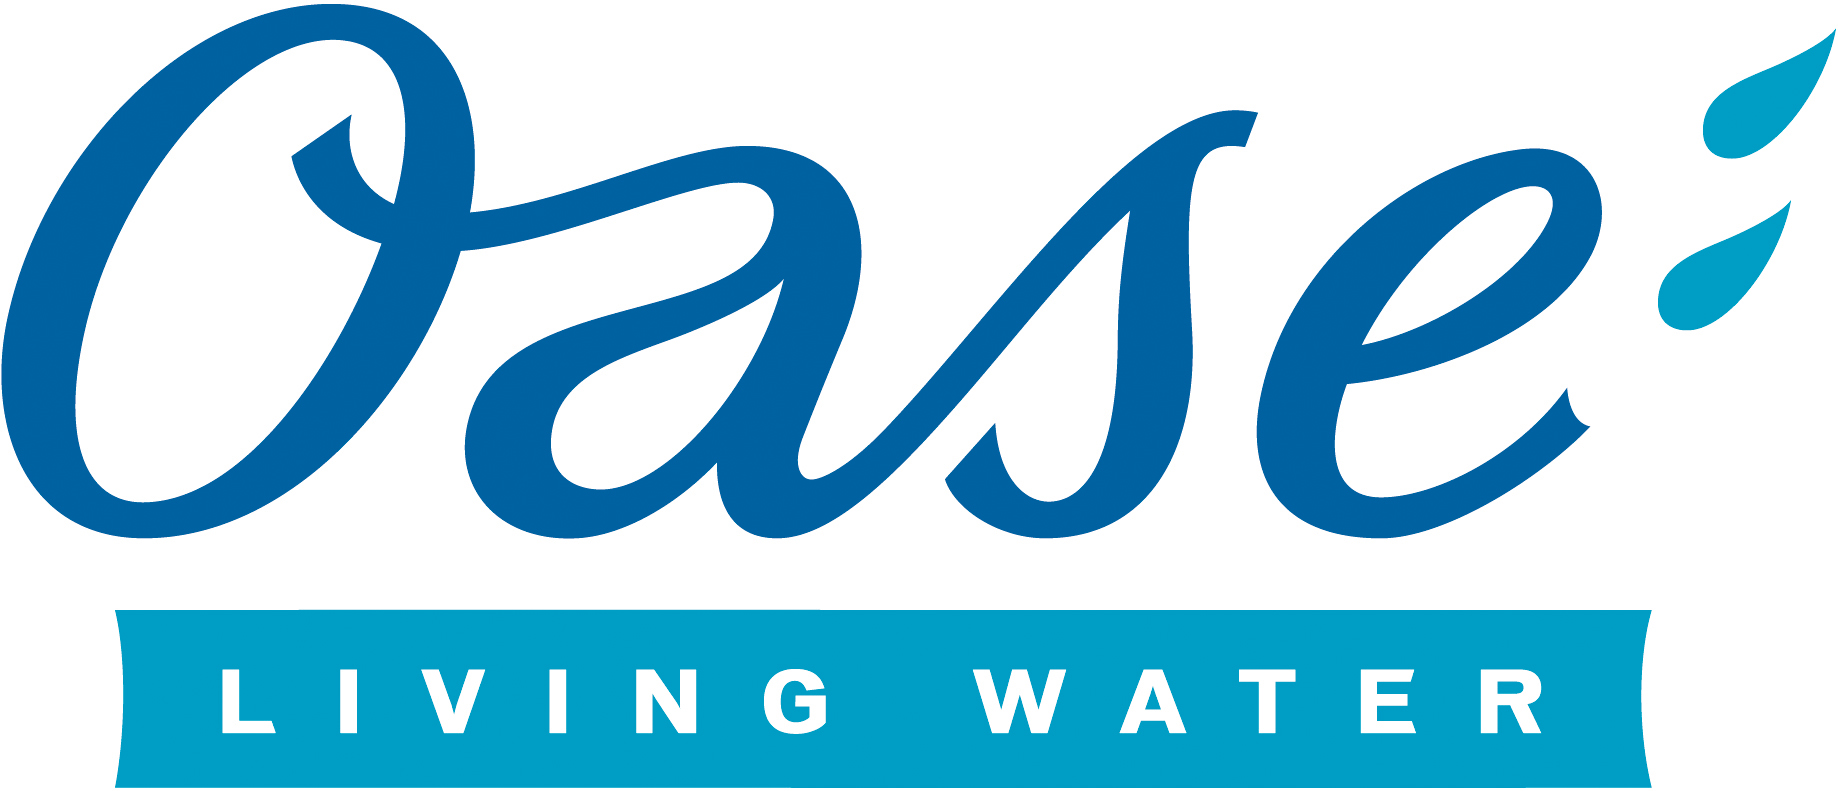 Welcome - OASE Living Water